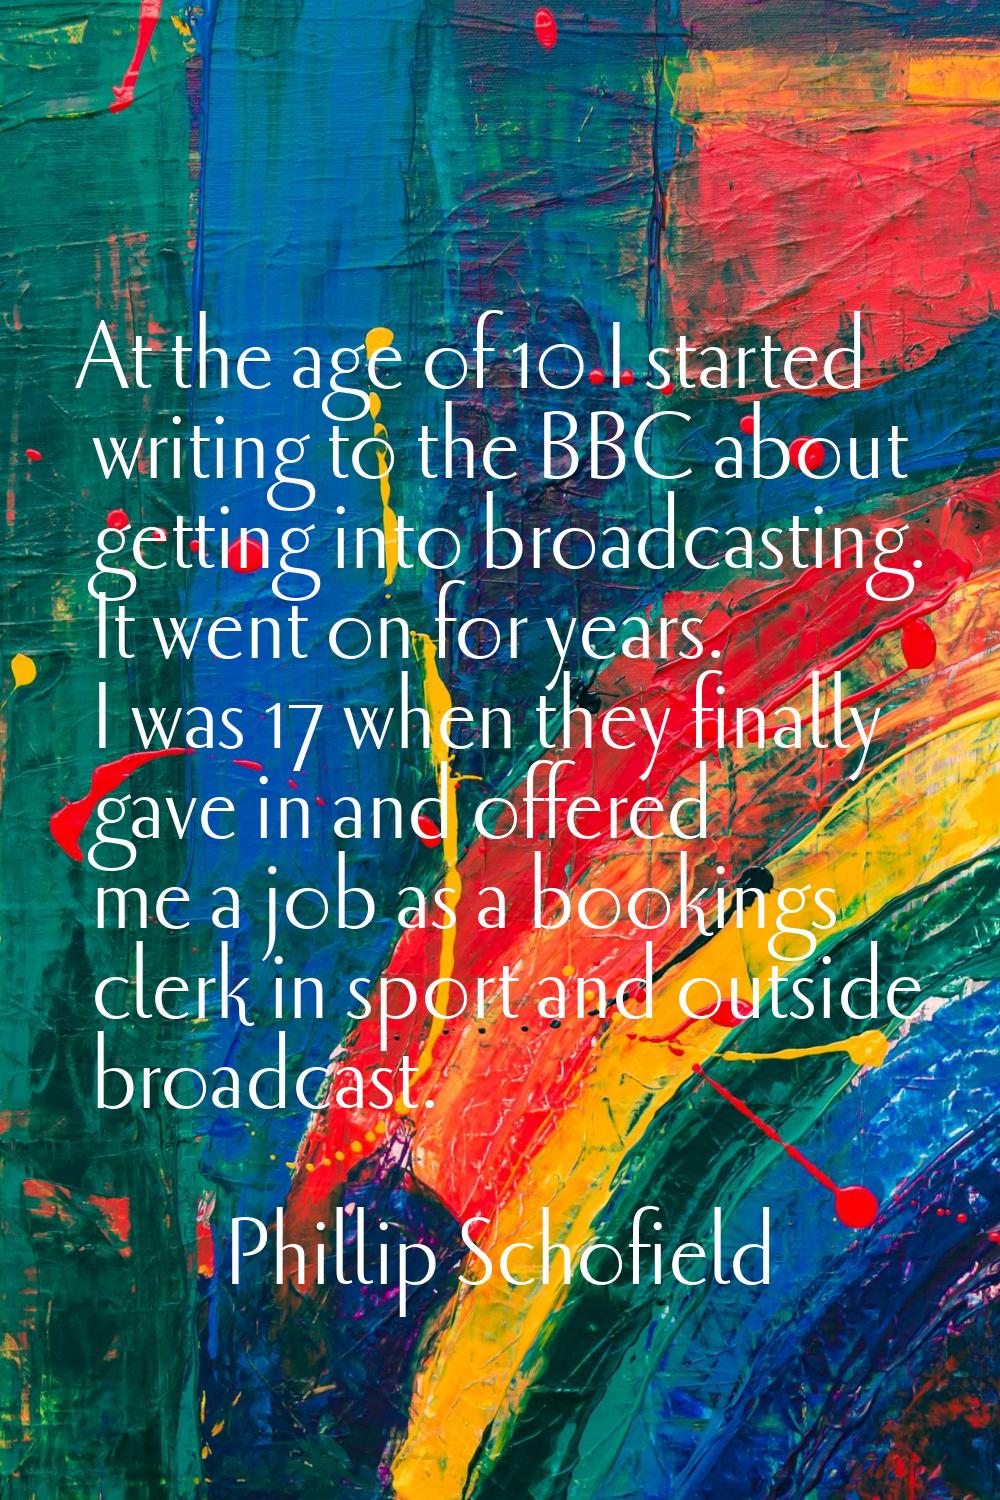 At the age of 10 I started writing to the BBC about getting into broadcasting. It went on for years